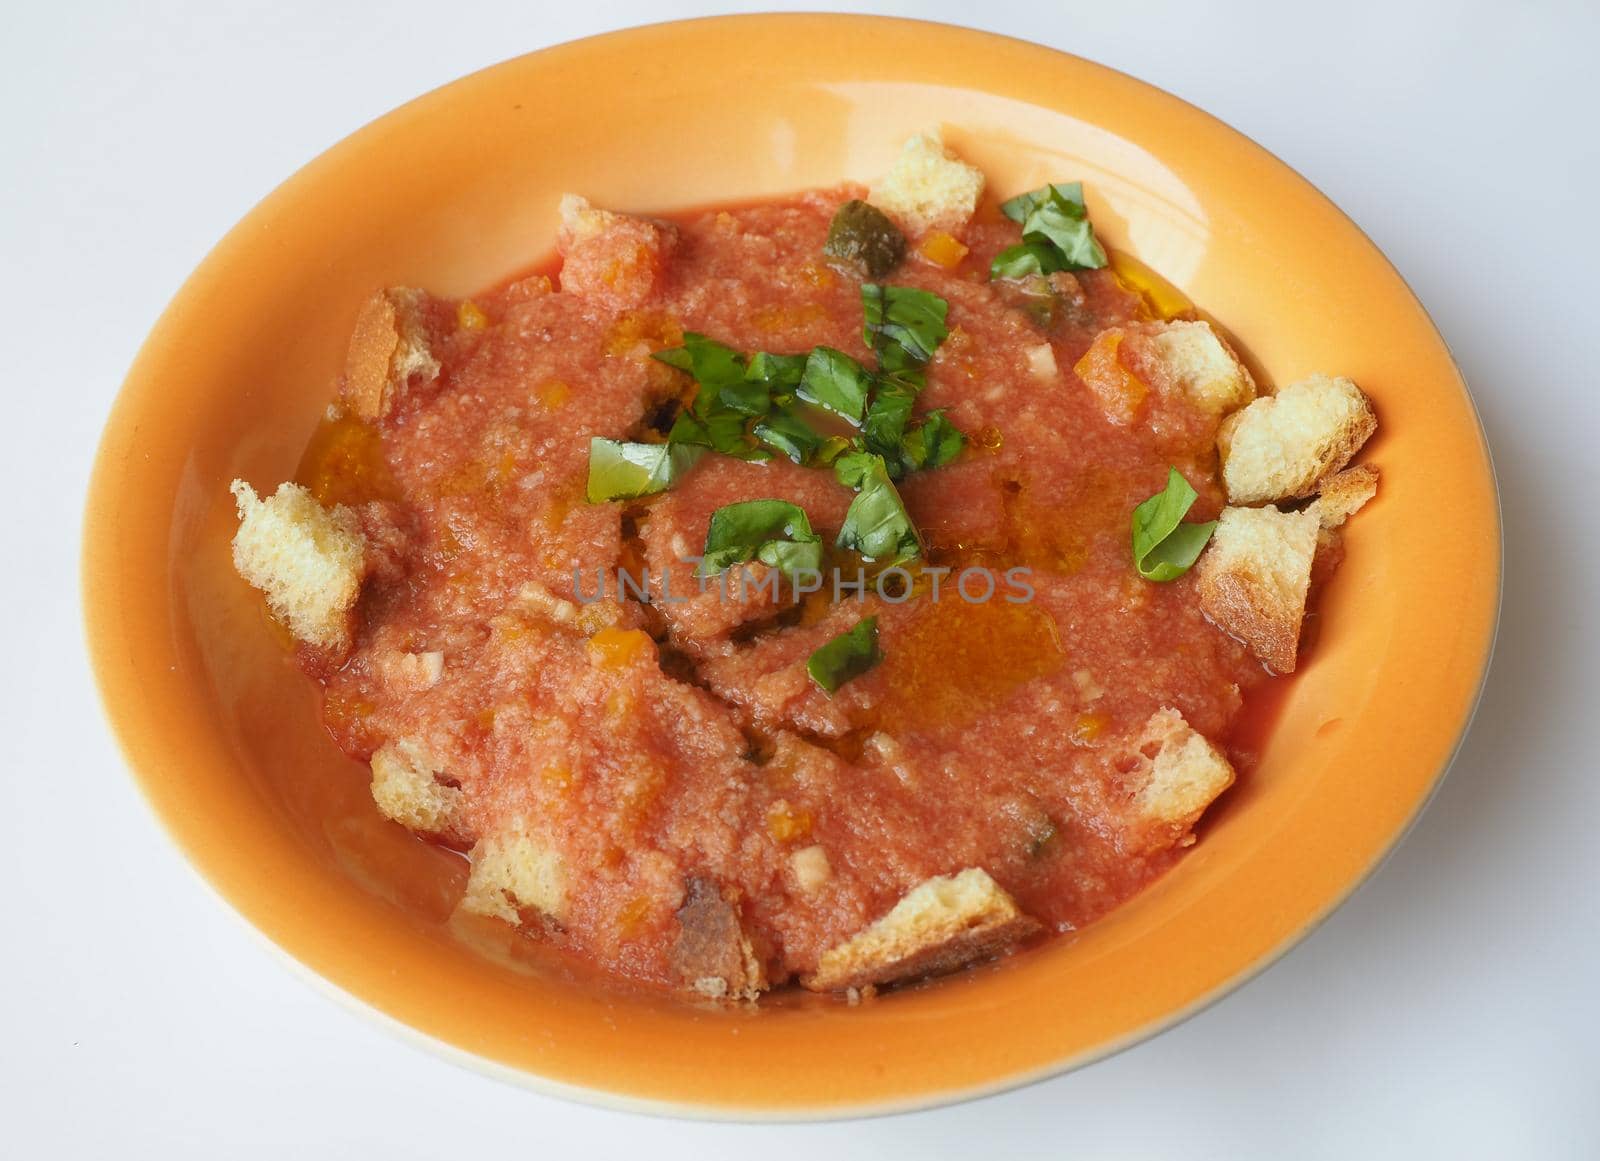 Dish of Spanish gazpacho cold soup made of tomato soup and bread